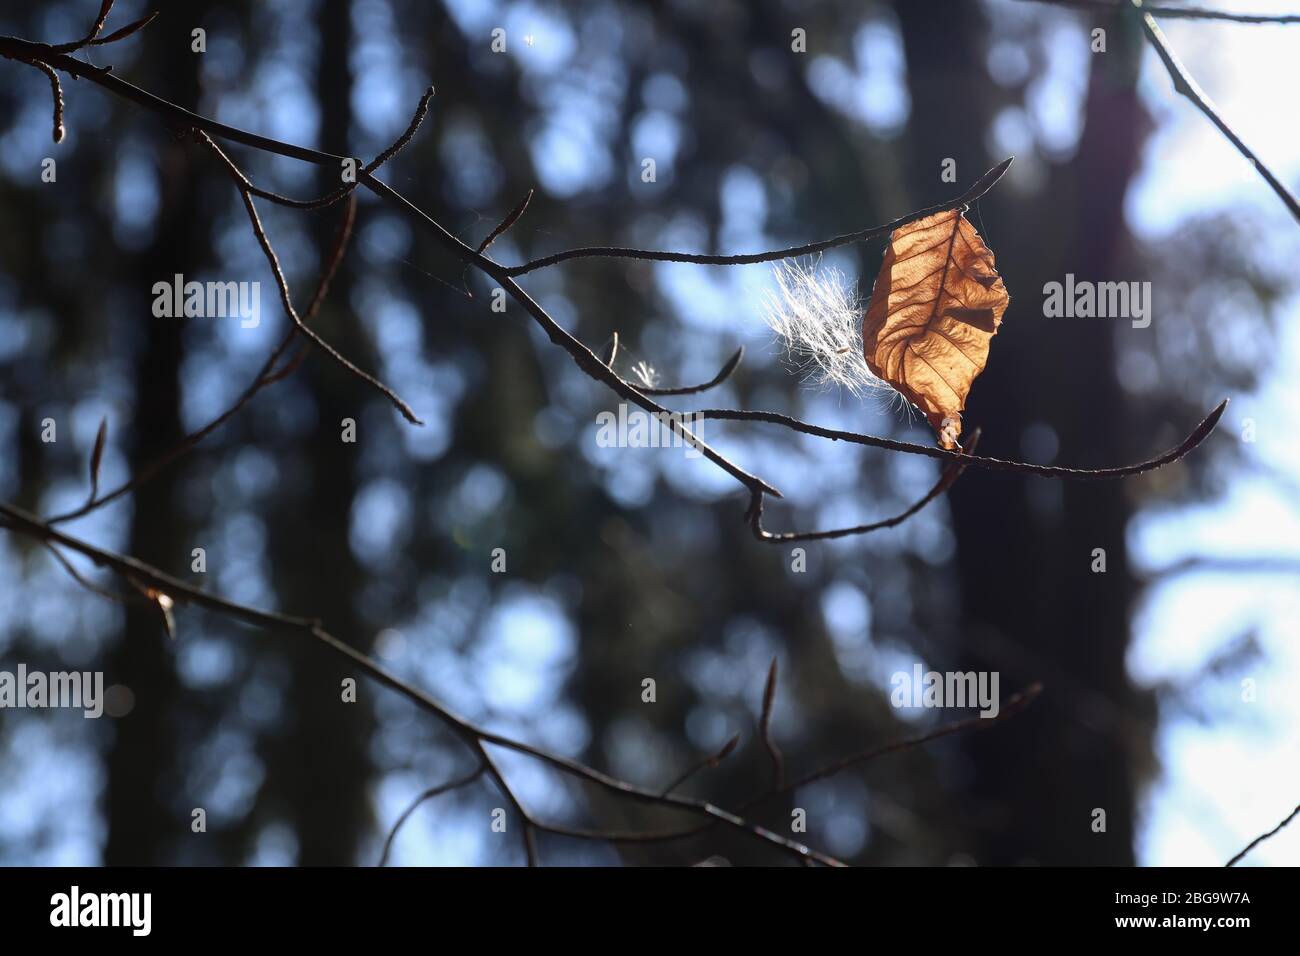 Abstract image of the old leaf and fluff on twigs of tree in back light Stock Photo